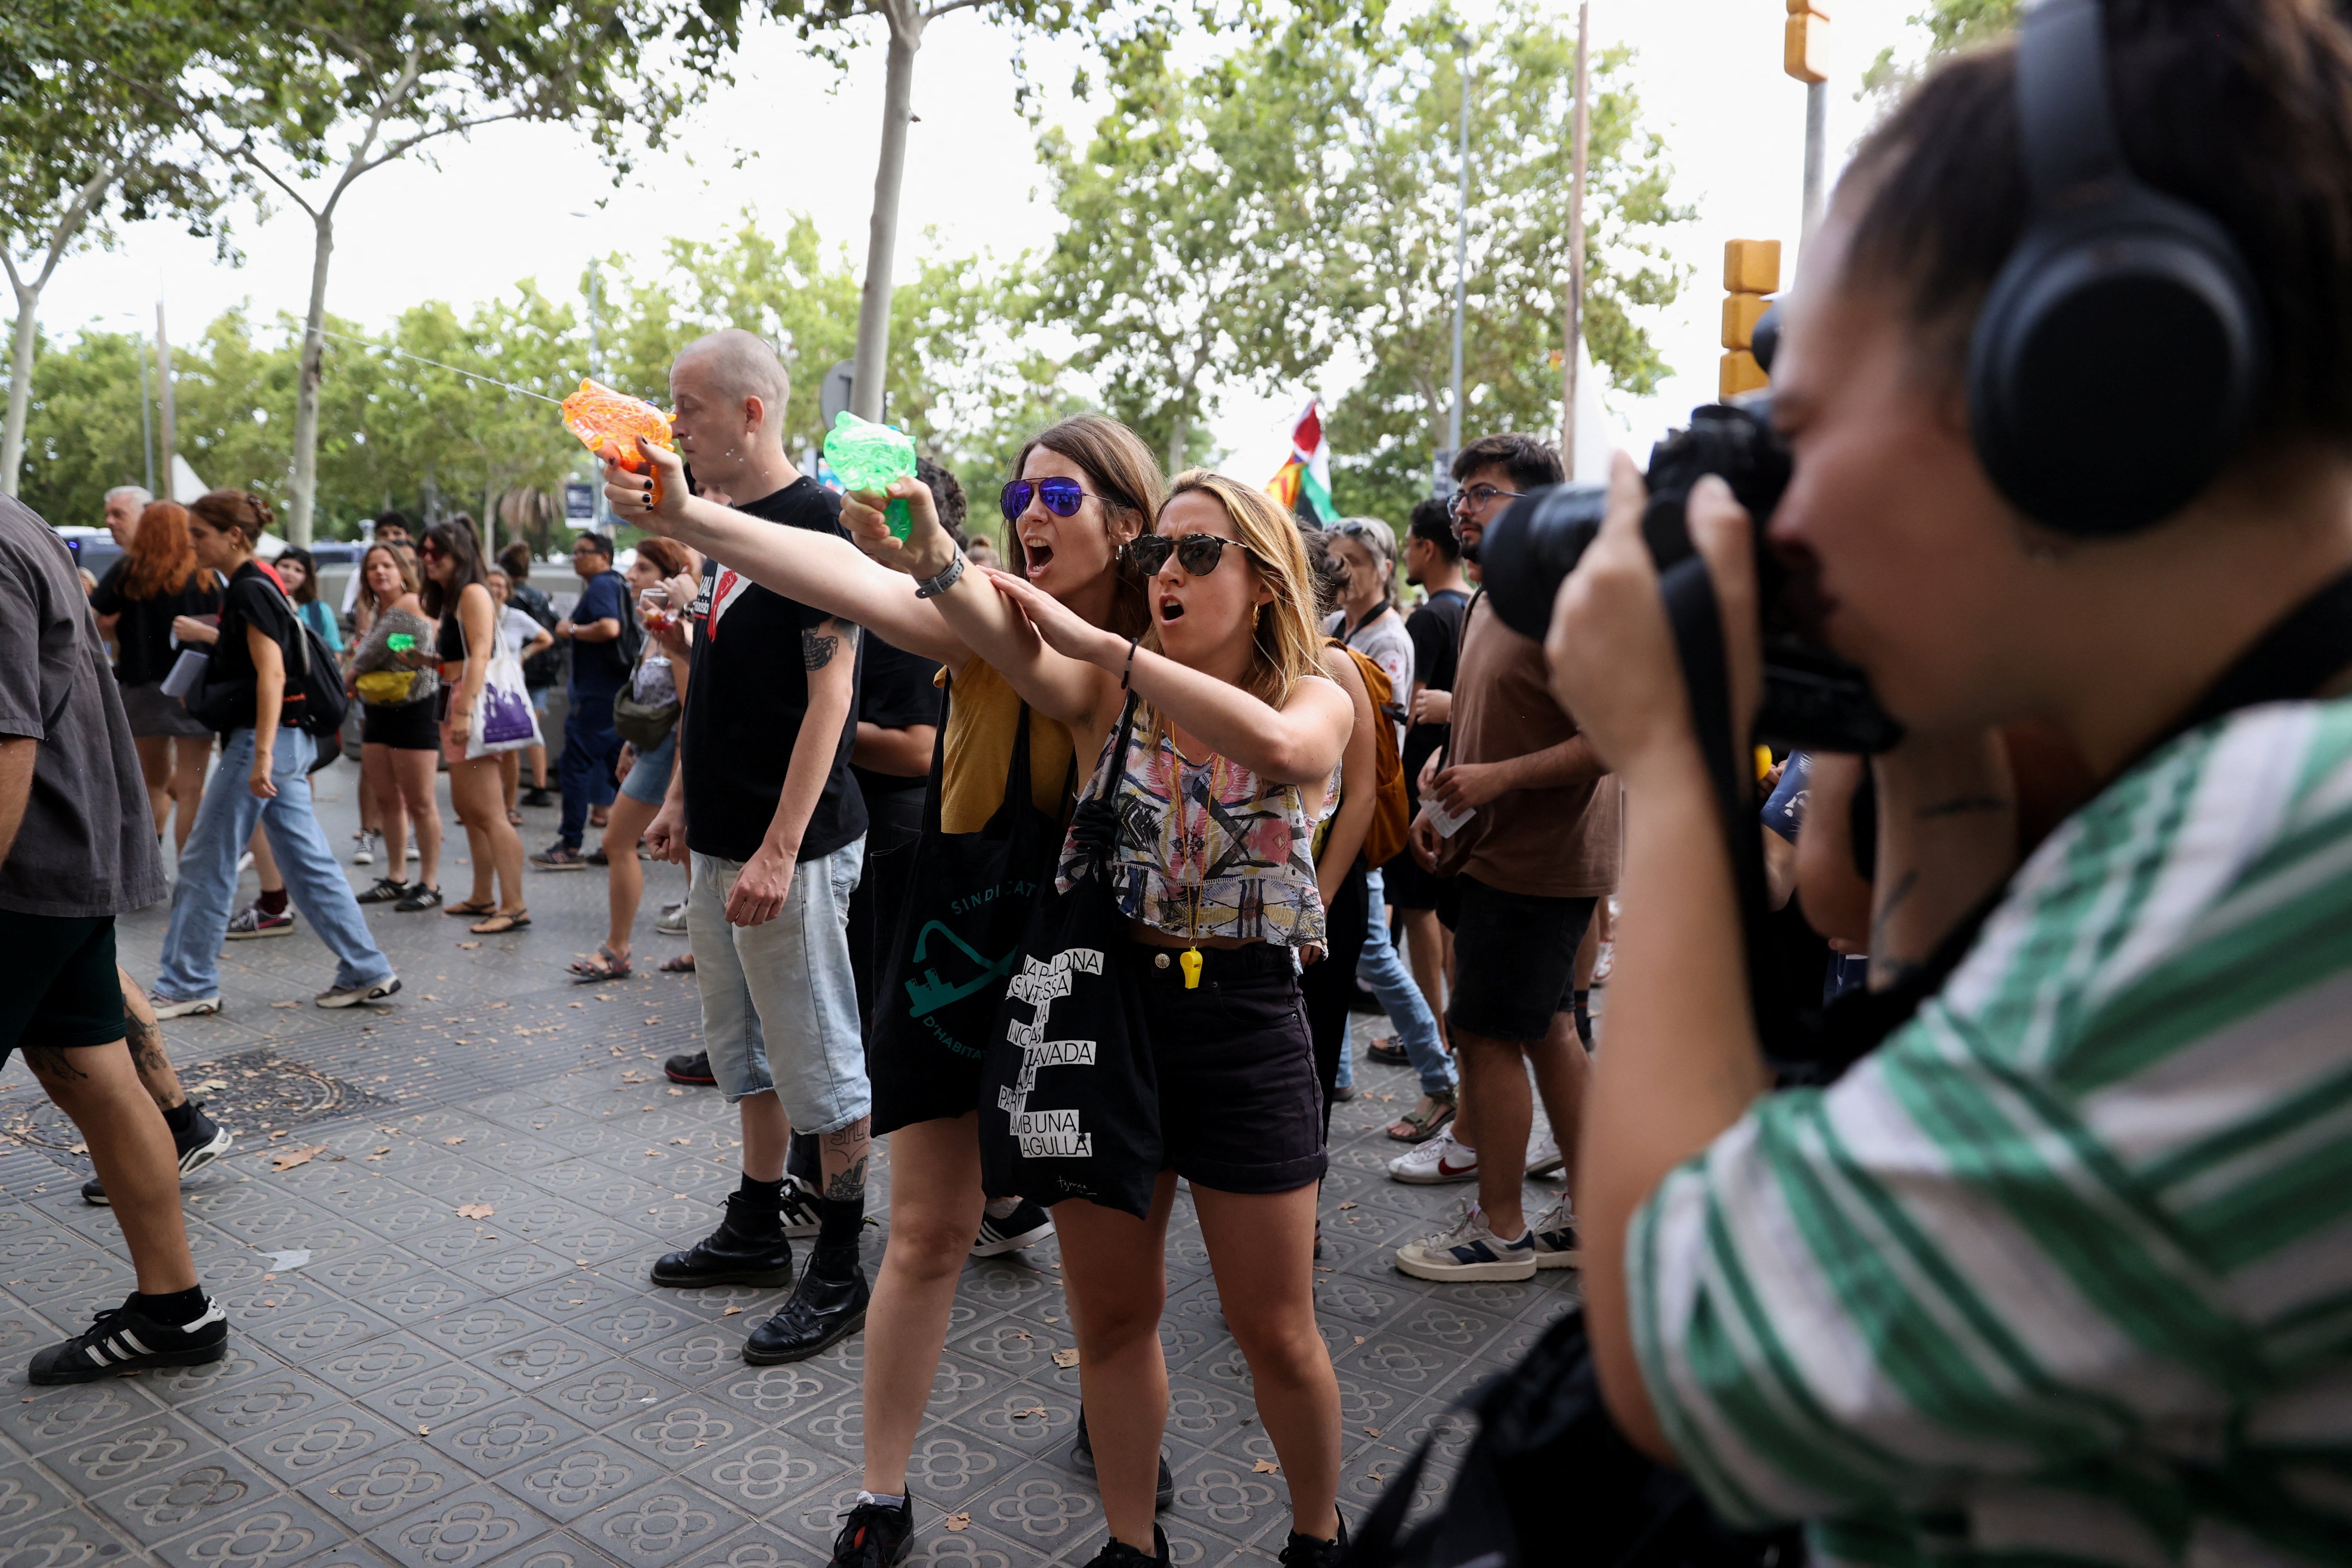 A crowd of almost 3,000 rallied against an influx of tourists in Barcelona